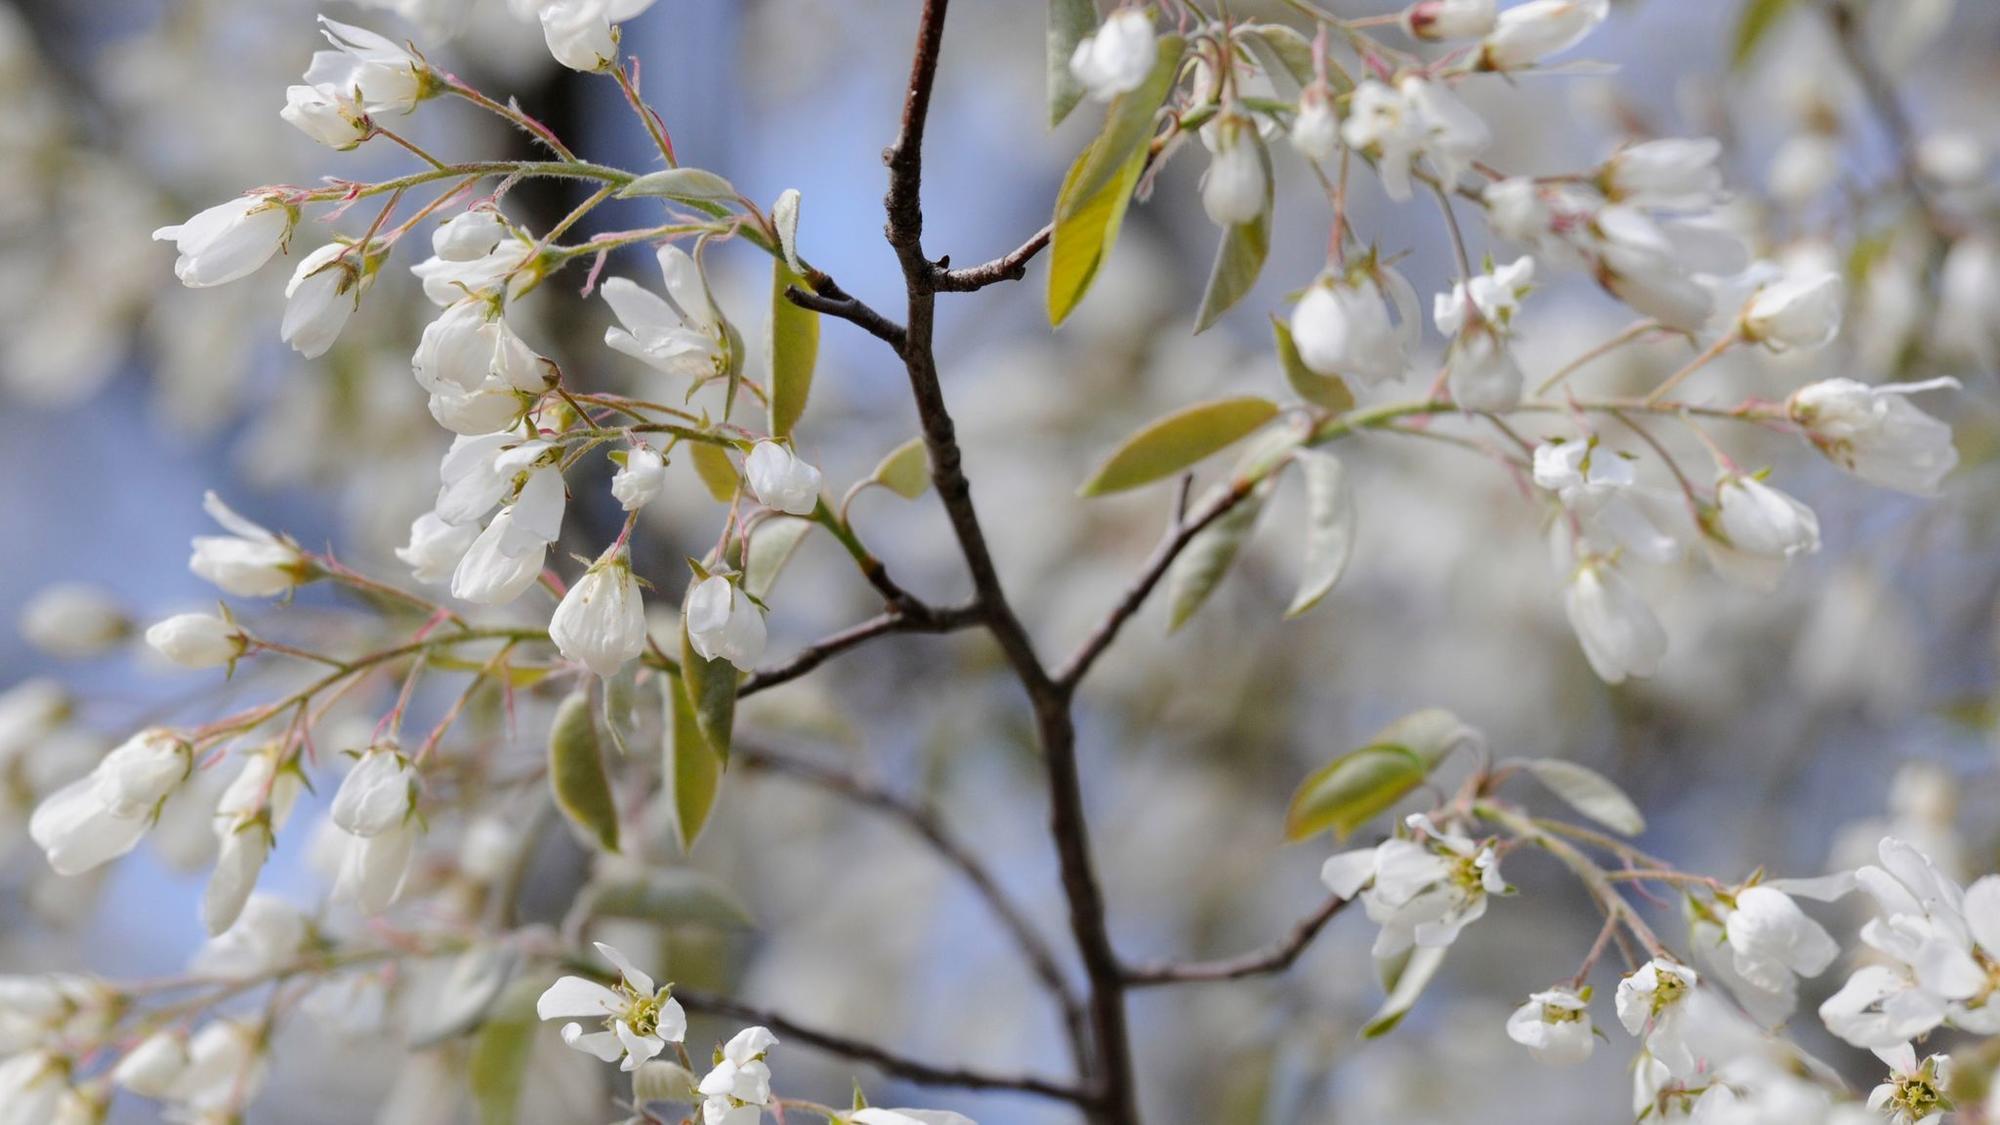 When forcing cut branches to flower, here's how long it takes to see blooms - Chicago Tribune